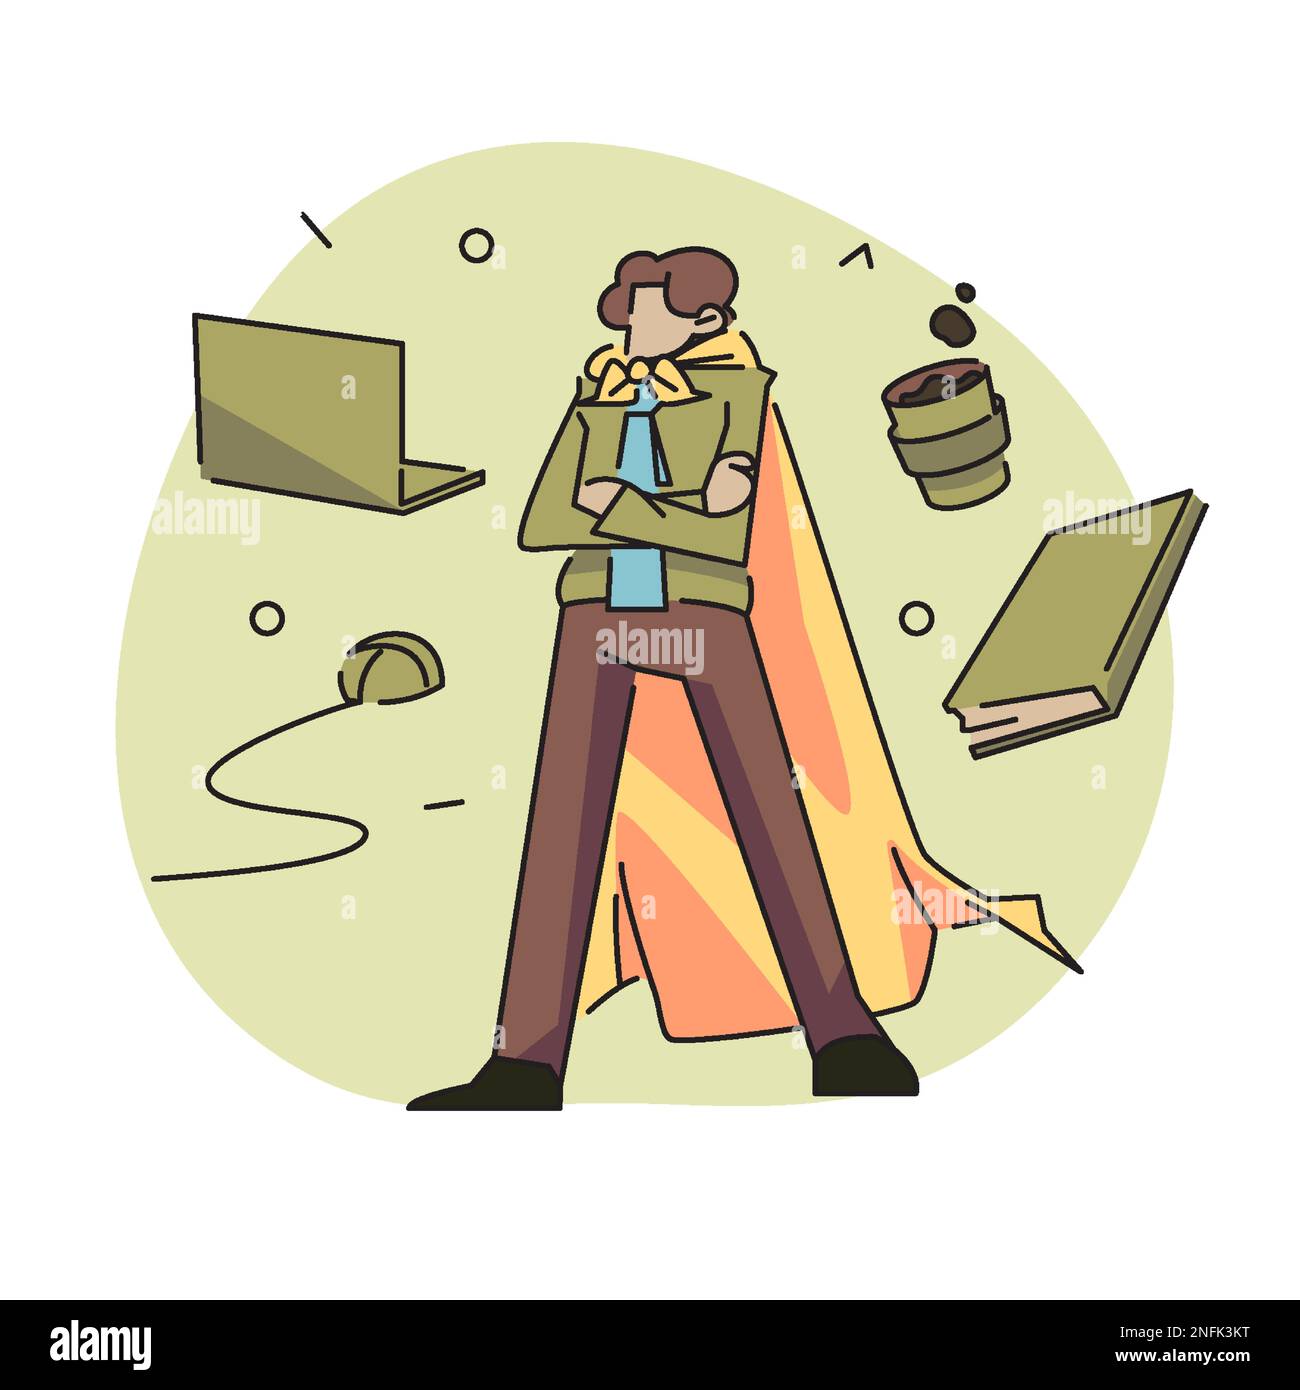 A flat vector illustration of a character's workstation, overflowing with laptops, mice, coffee cups, and piles of documents. The character and their Stock Vector